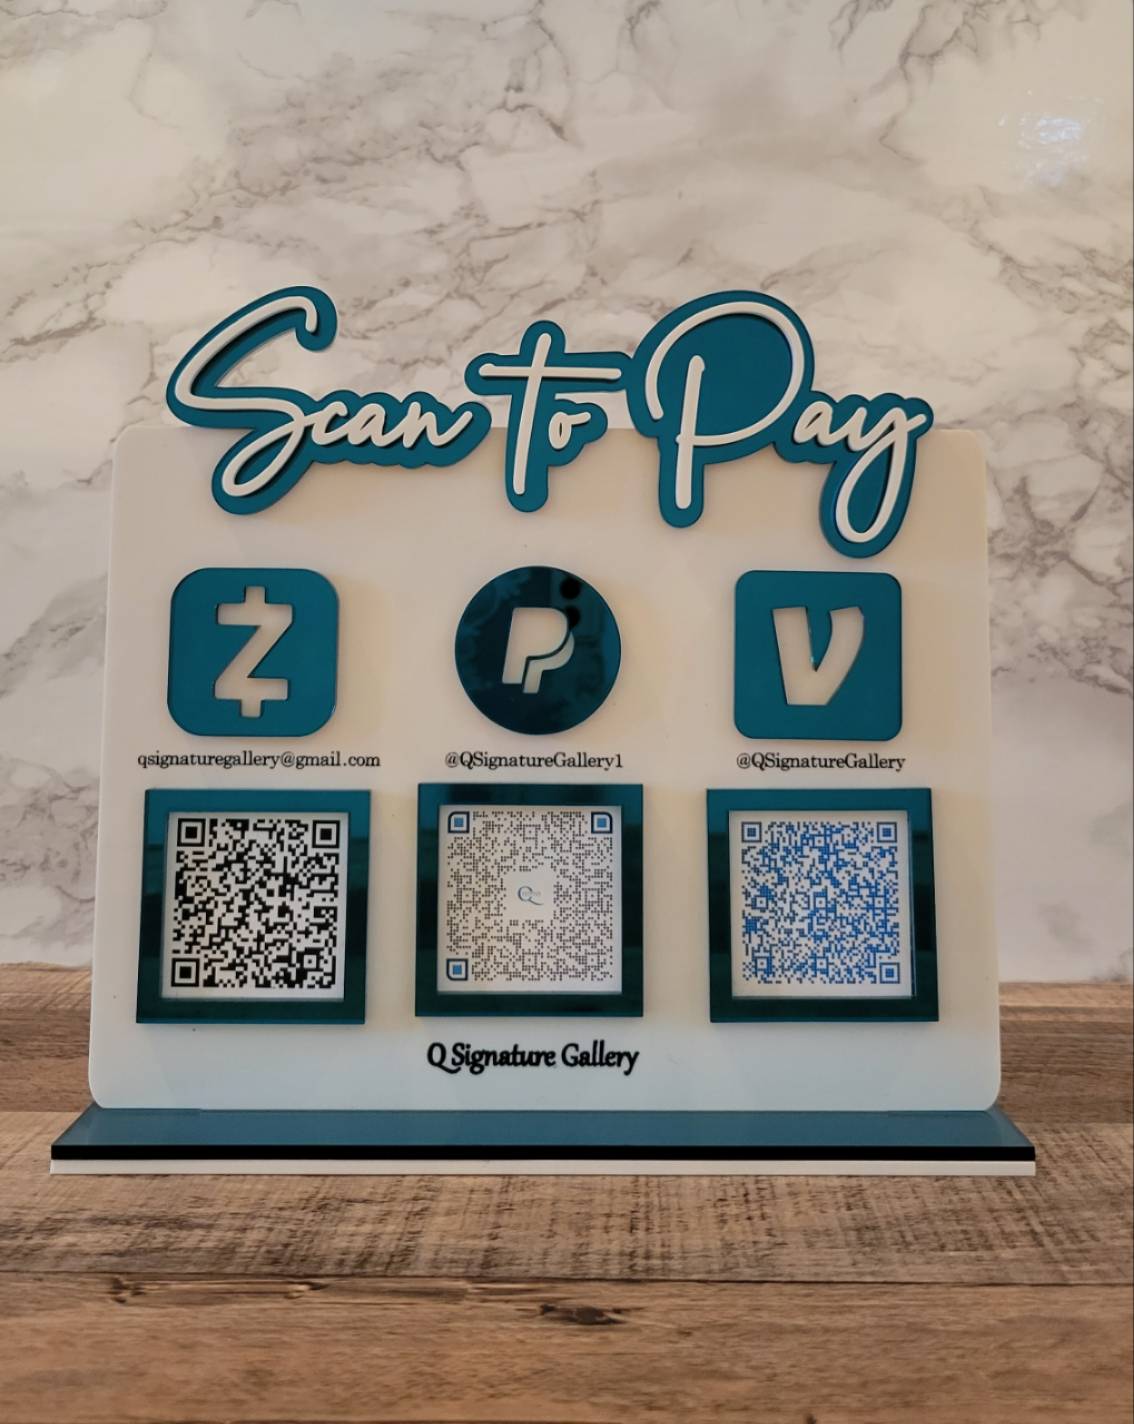 Scan to Pay sign with QR codes in teal mirror